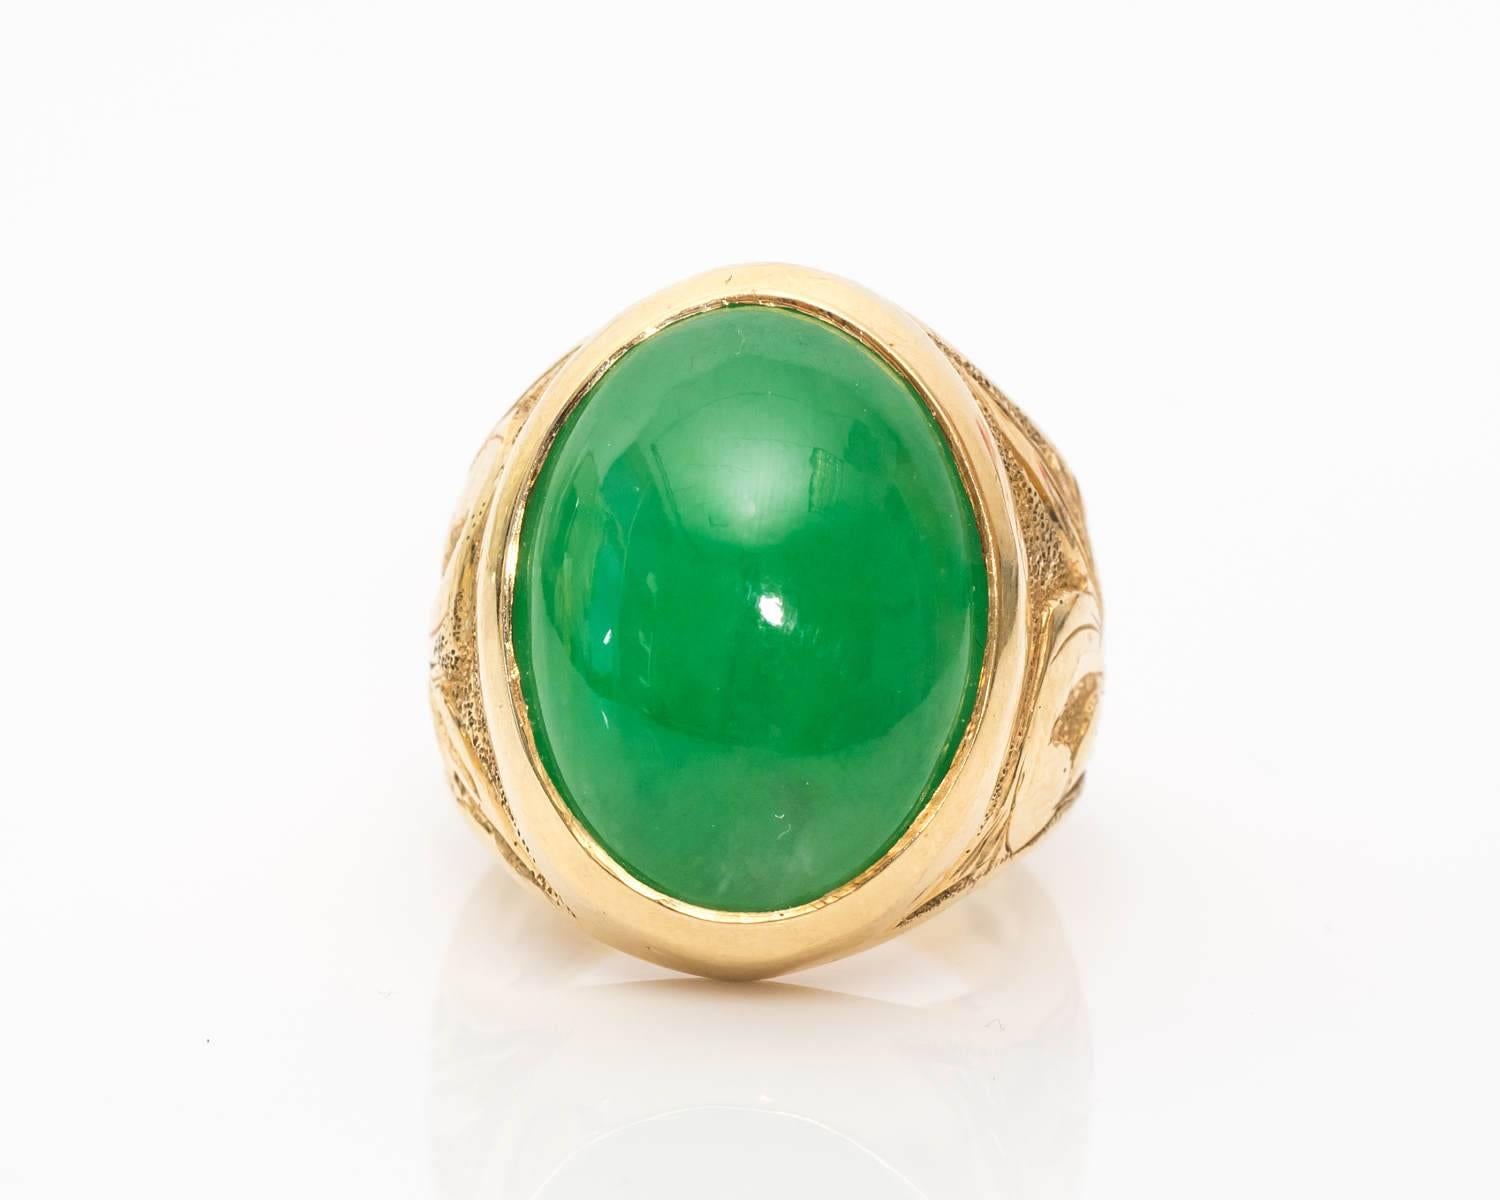 Dramatic yet gorgeous Jade Ring Crafted in 14 Karat Yellow Gold
Features a large oval cabochon Jade
Natural with Minimal Treatments, Beautiful Candy Apple Green Color
Set in Bezel Frame, tapes down to Fanciful Shoulders 
Shoulders on the Ring